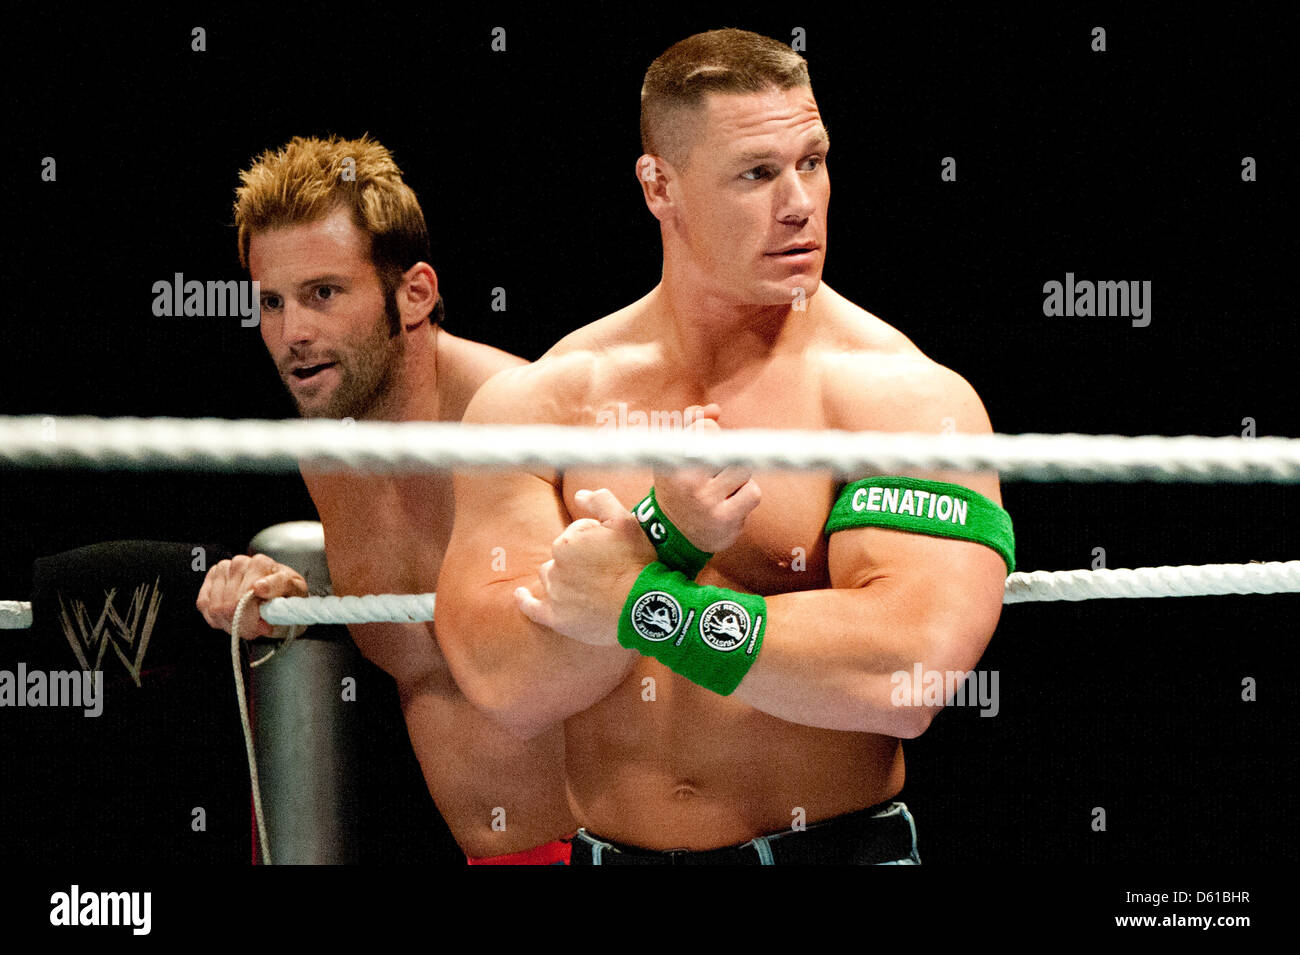 US-wrestler John Cena (R) holds on to the ropes of the wrestling ring as he stands next to US-wrestler Zack Ryder during a fight in the RAW WrestleMania Revenge Tour at the o2 World canue in Berlin, Germany, 14 April 2012. The WWE (World Wrestling Entertainment) celebrates its 20th German anniversary this April. The first show in Germany was staged in Kiel, Germany, in April 1992.  Stock Photo